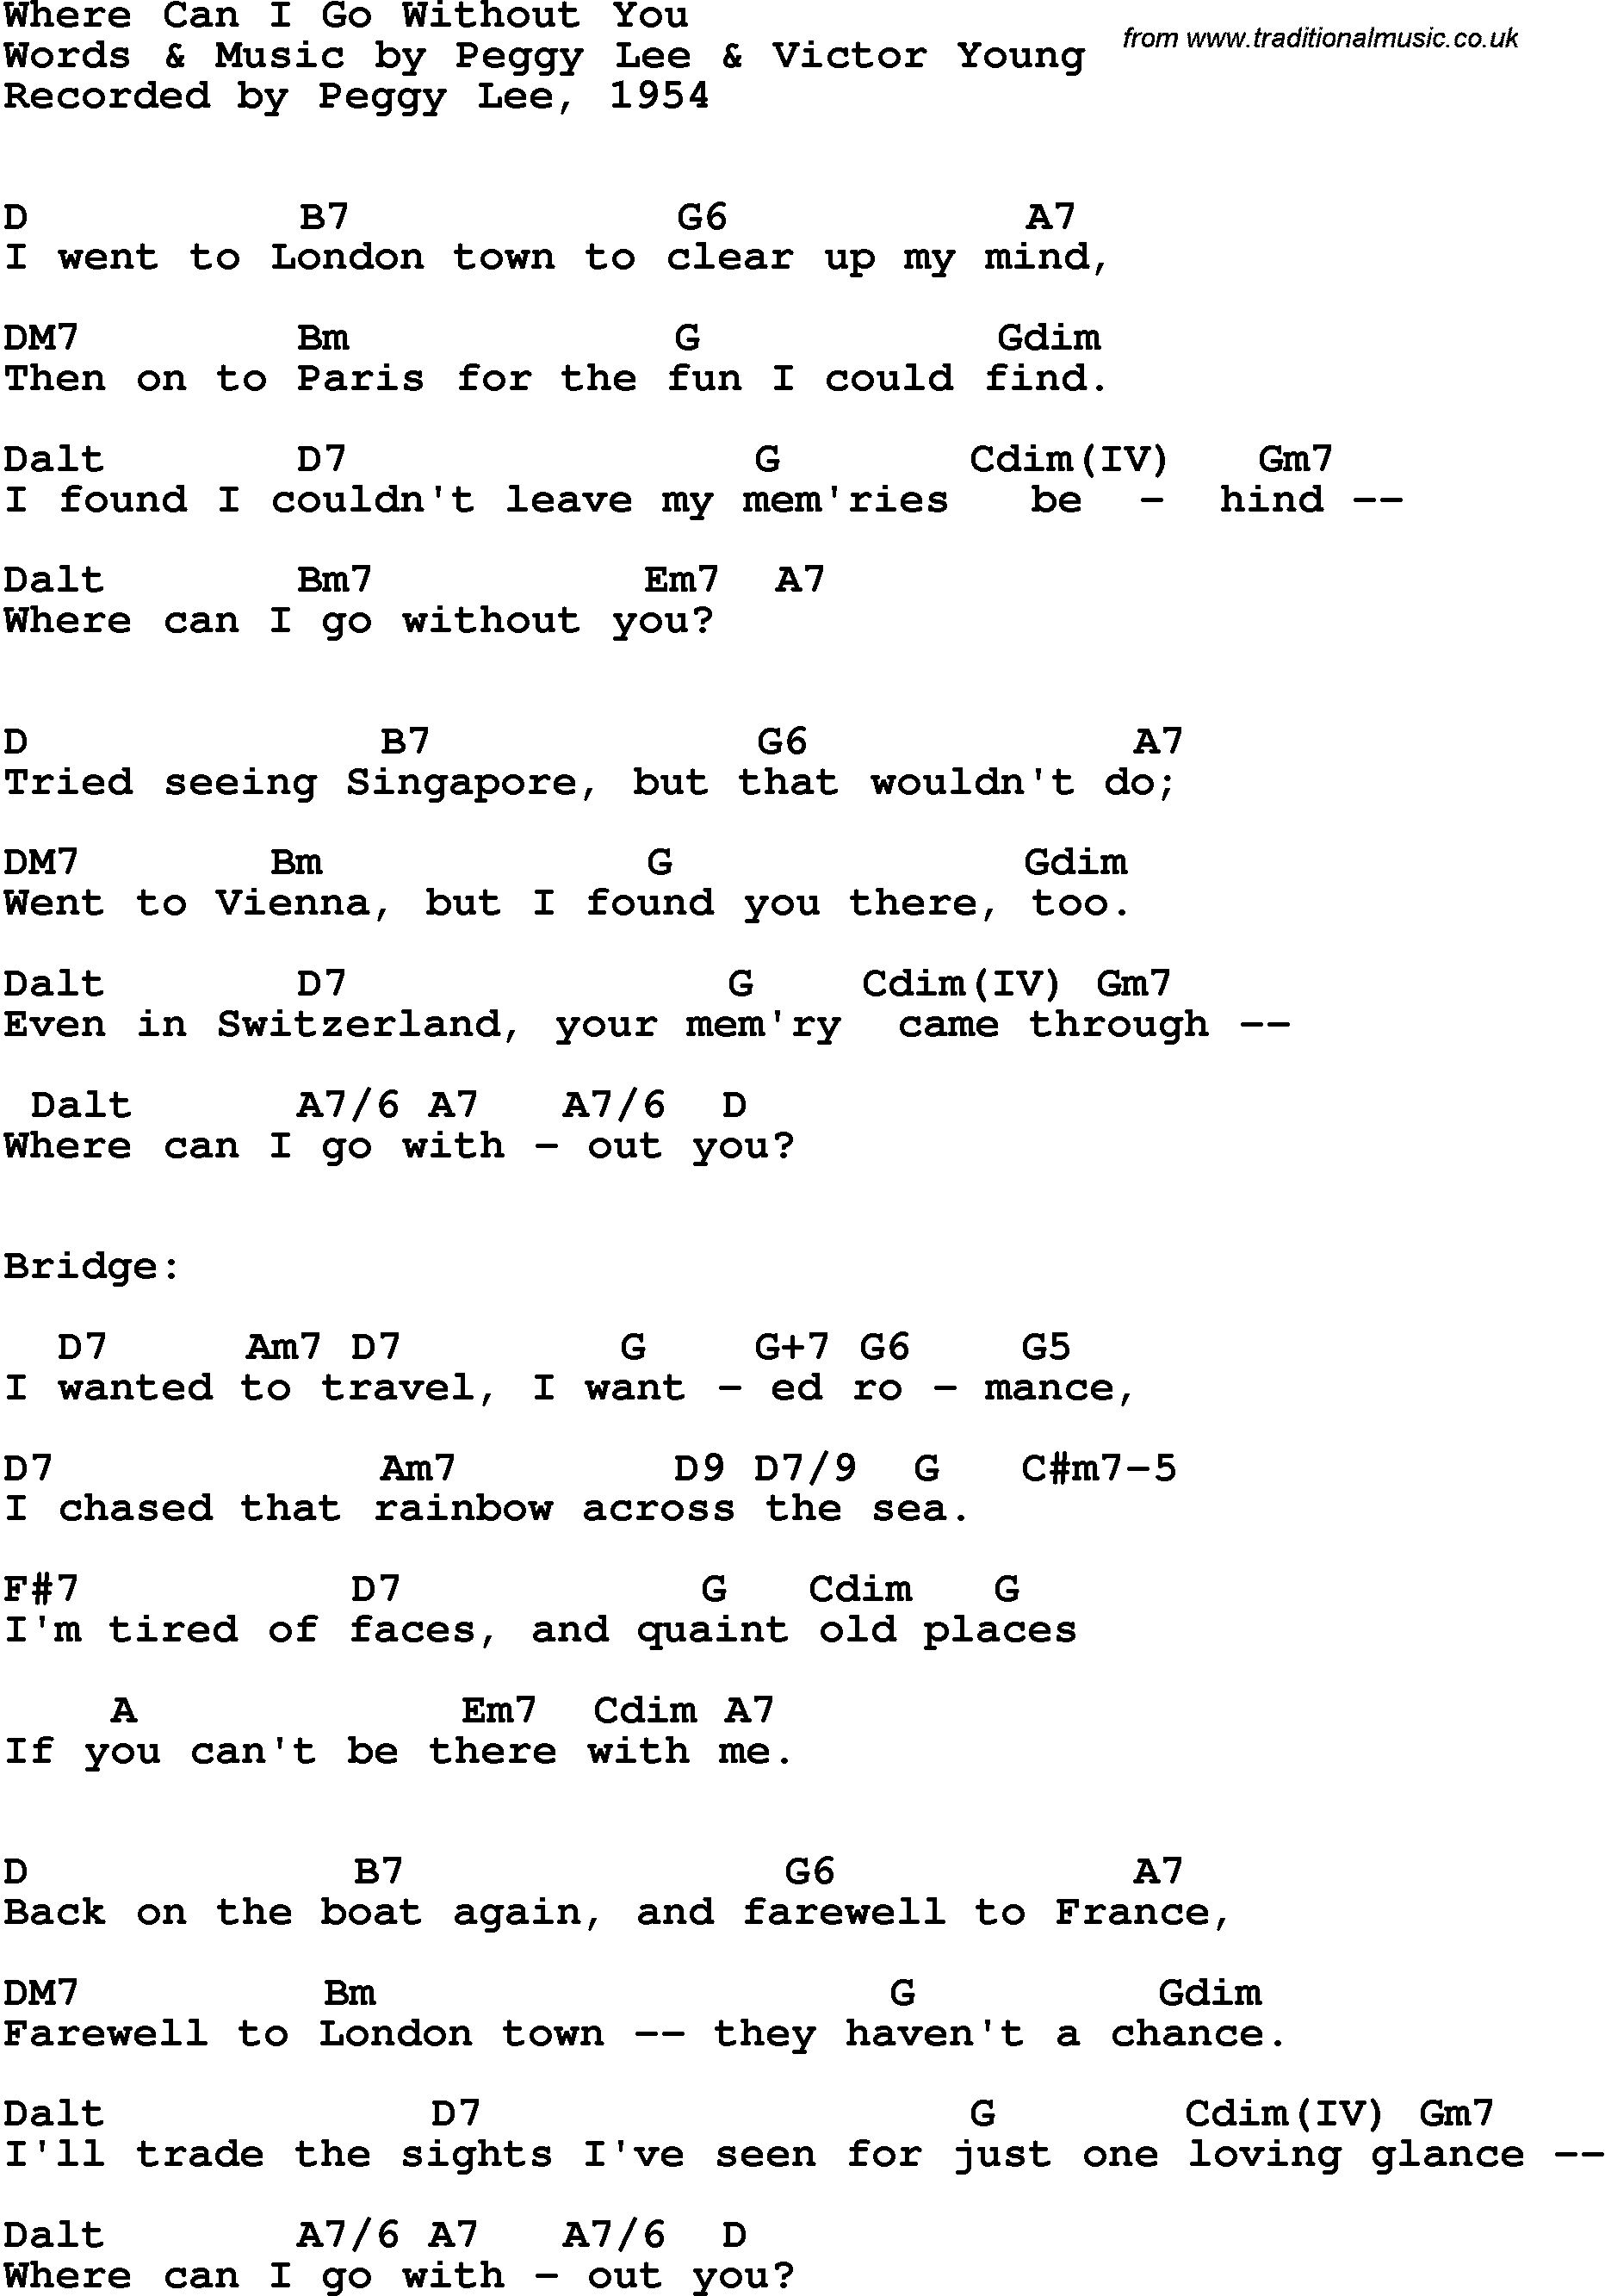 Song Lyrics with guitar chords for Where Can I Go Without You - Peggy Lee, 1954